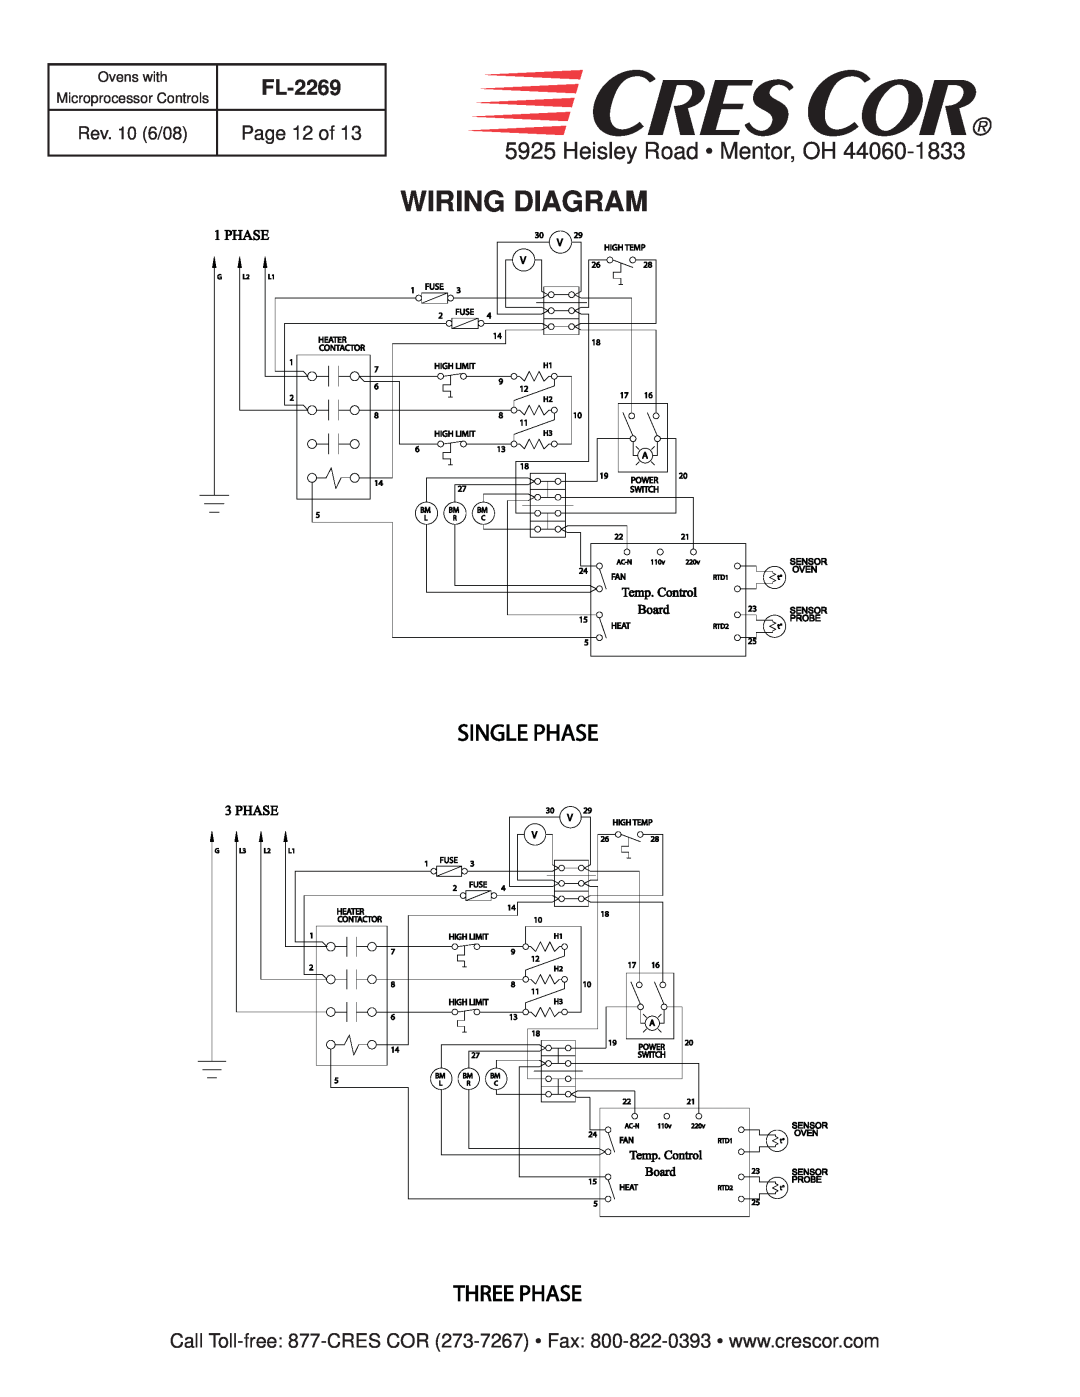 Cres Cor RO151FUA18B-Q1 Wiring Diagram, Single Phase, Heisley Road Mentor, OH, Three Phase, FL-2269, Page 12 of, Board 